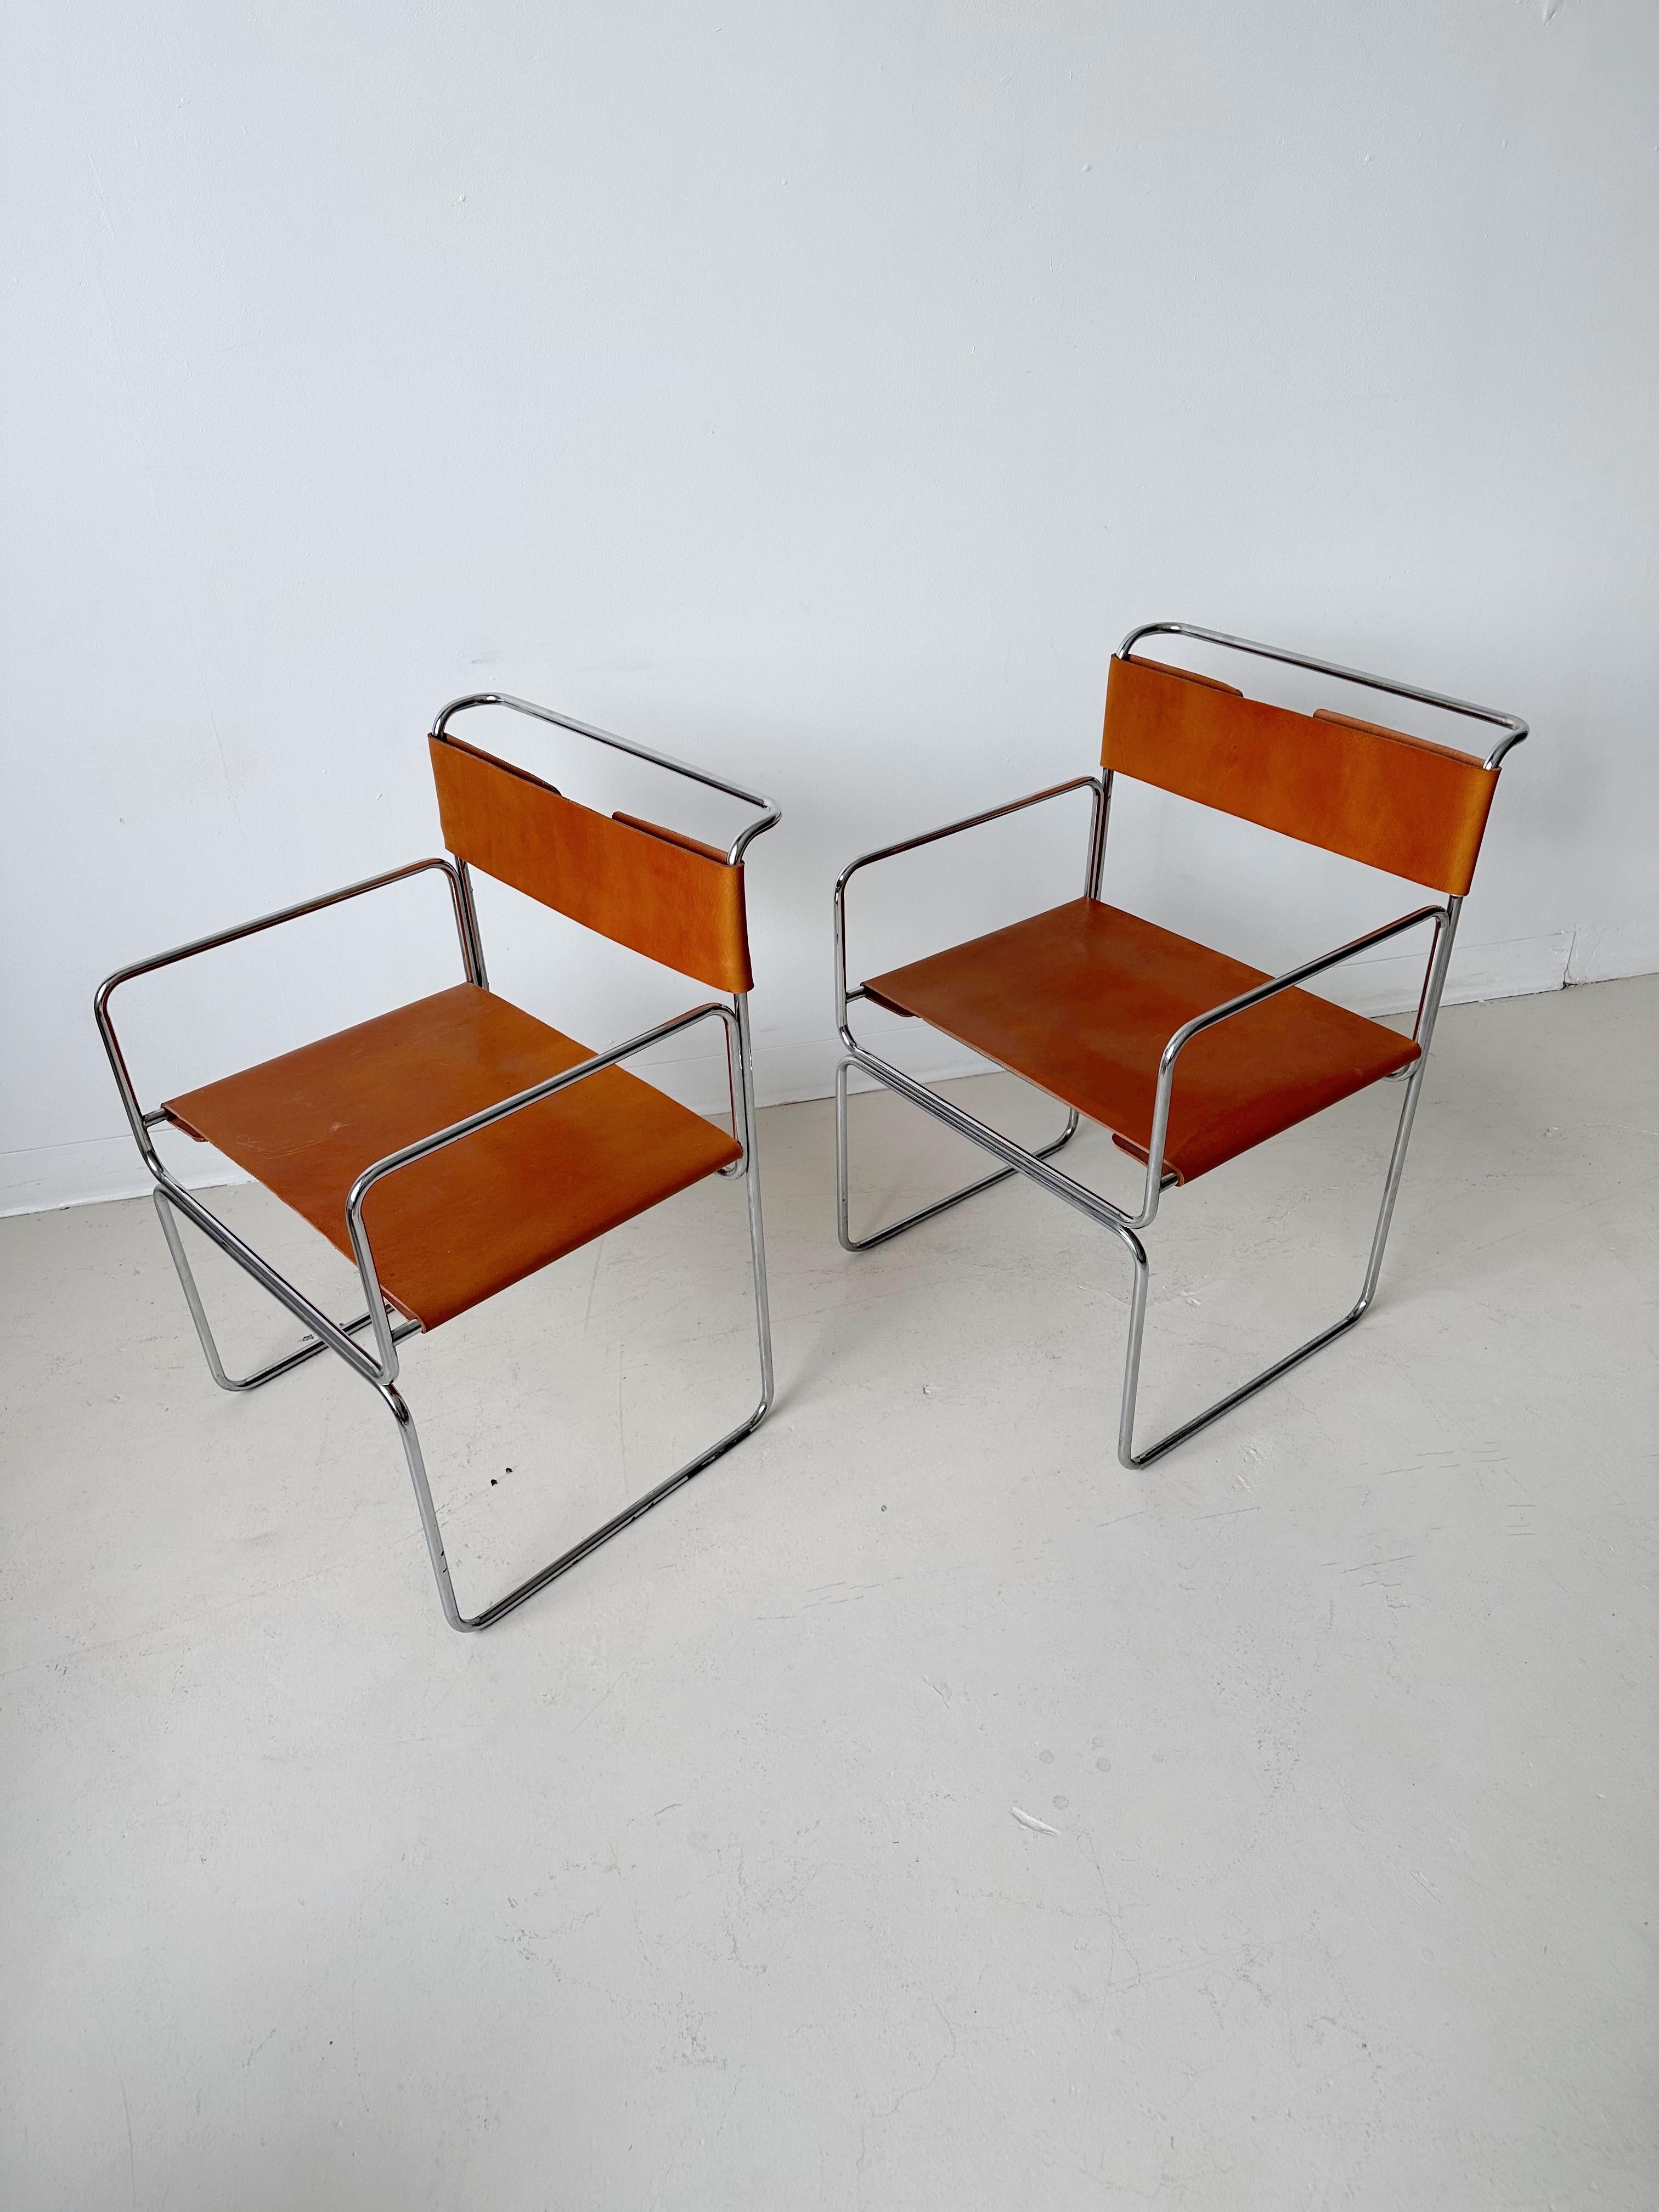 Tan Leather Libellula Chairs by Giovanni Carini for Planula, 70's For Sale 6